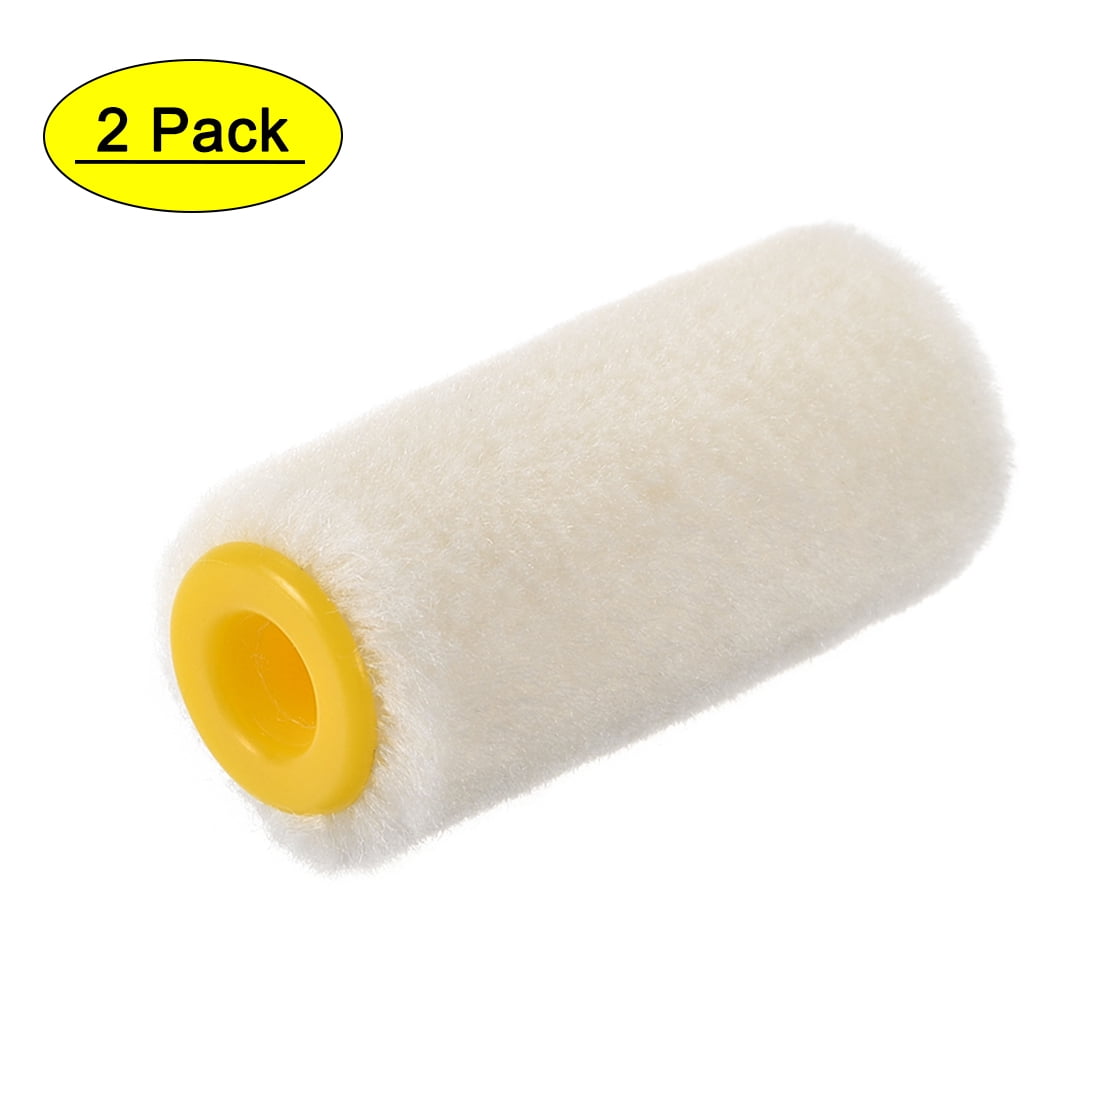 2 Pieces Mini Paint Rollers Tiny Roller for Painting 4/5 inch High Density  Wool Covers for House Decoration Painting Supplies Interior